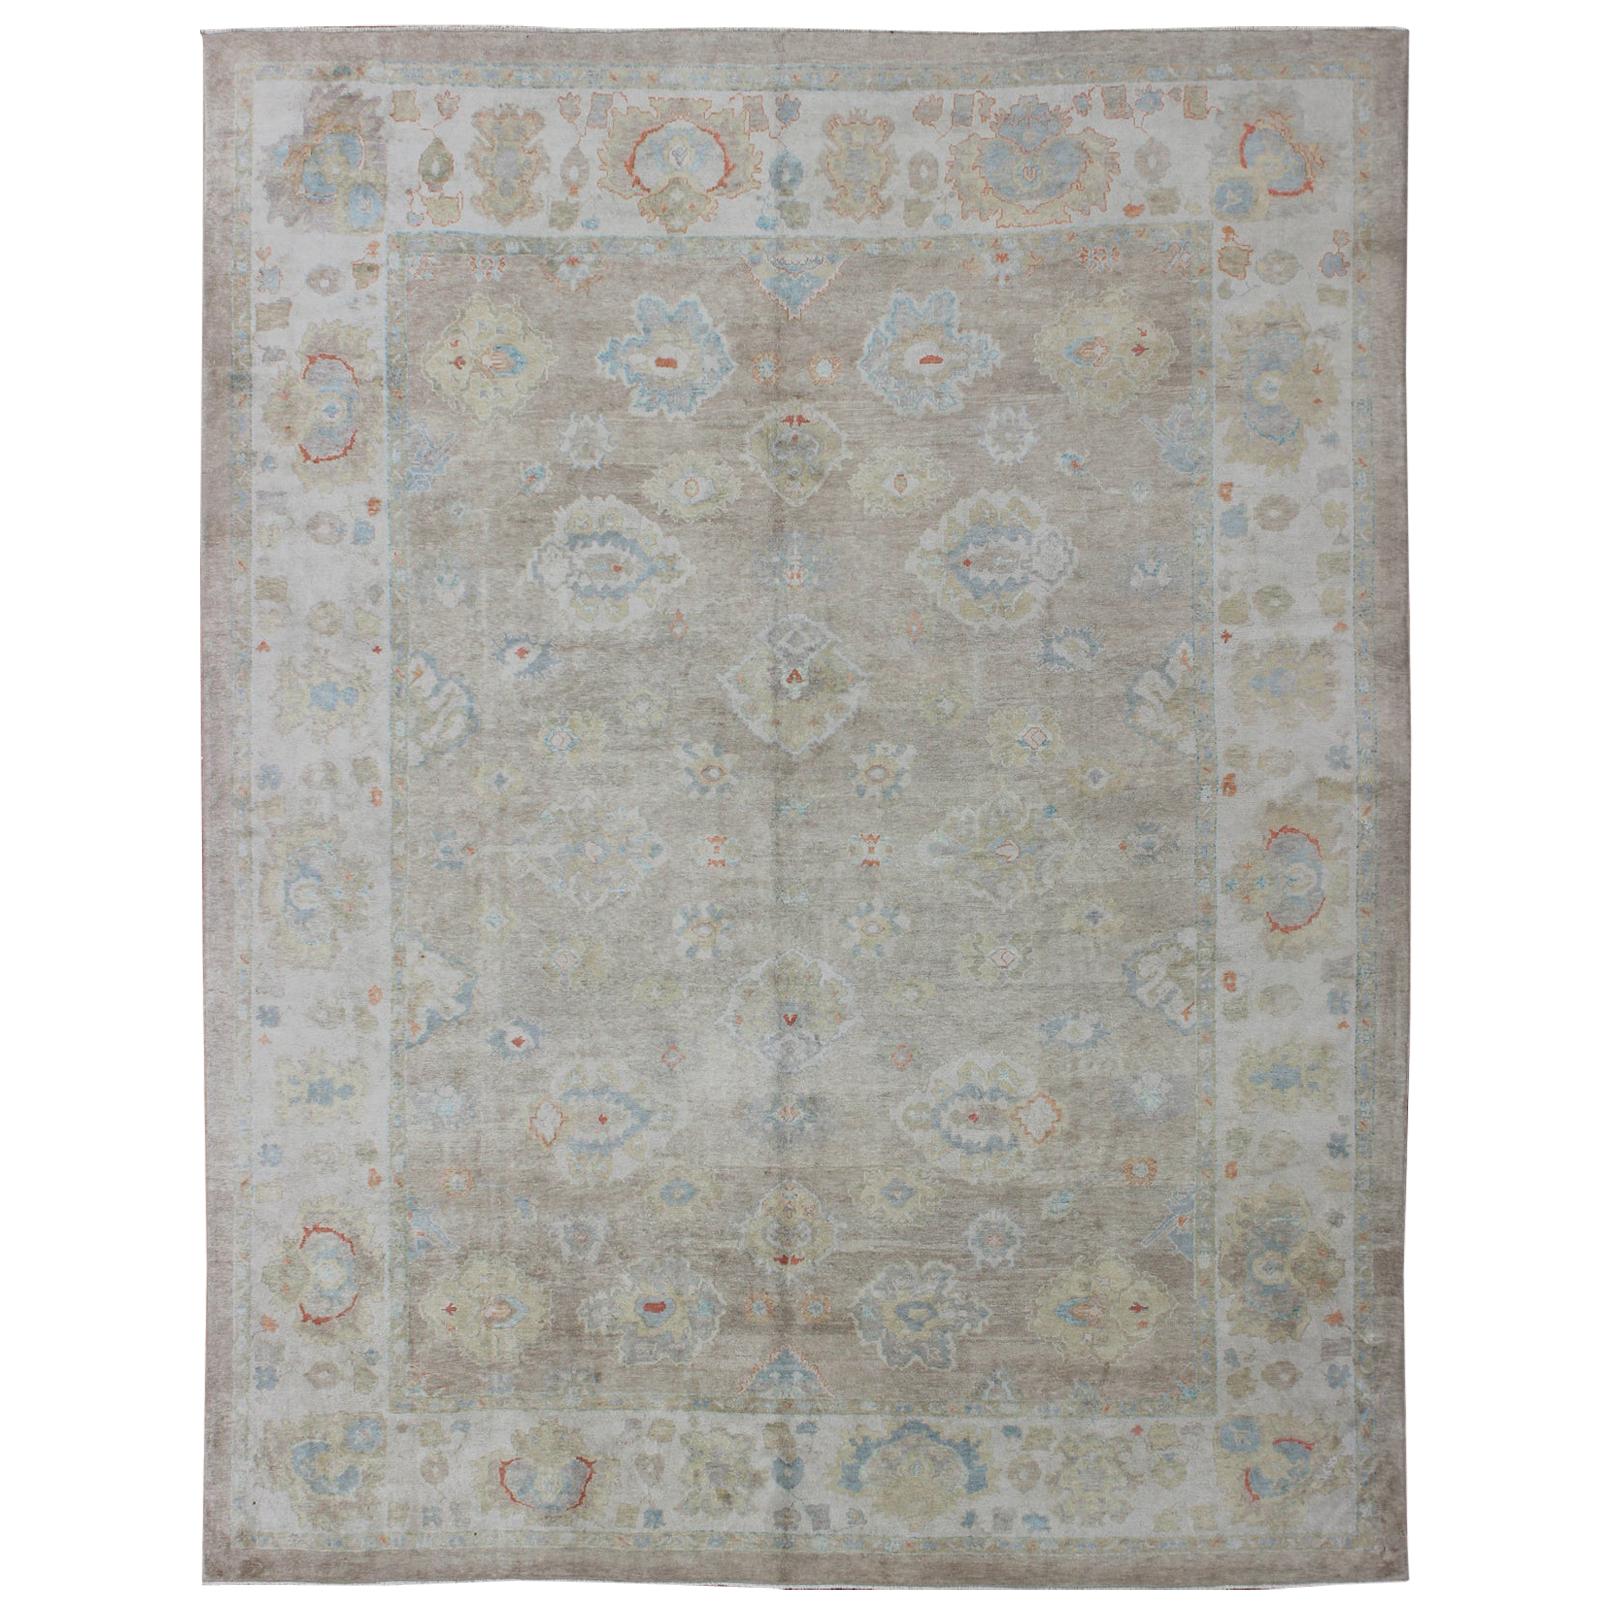 Large Turkish Oushak Rug with Neutral Color Palette and All-Over Flower Design For Sale